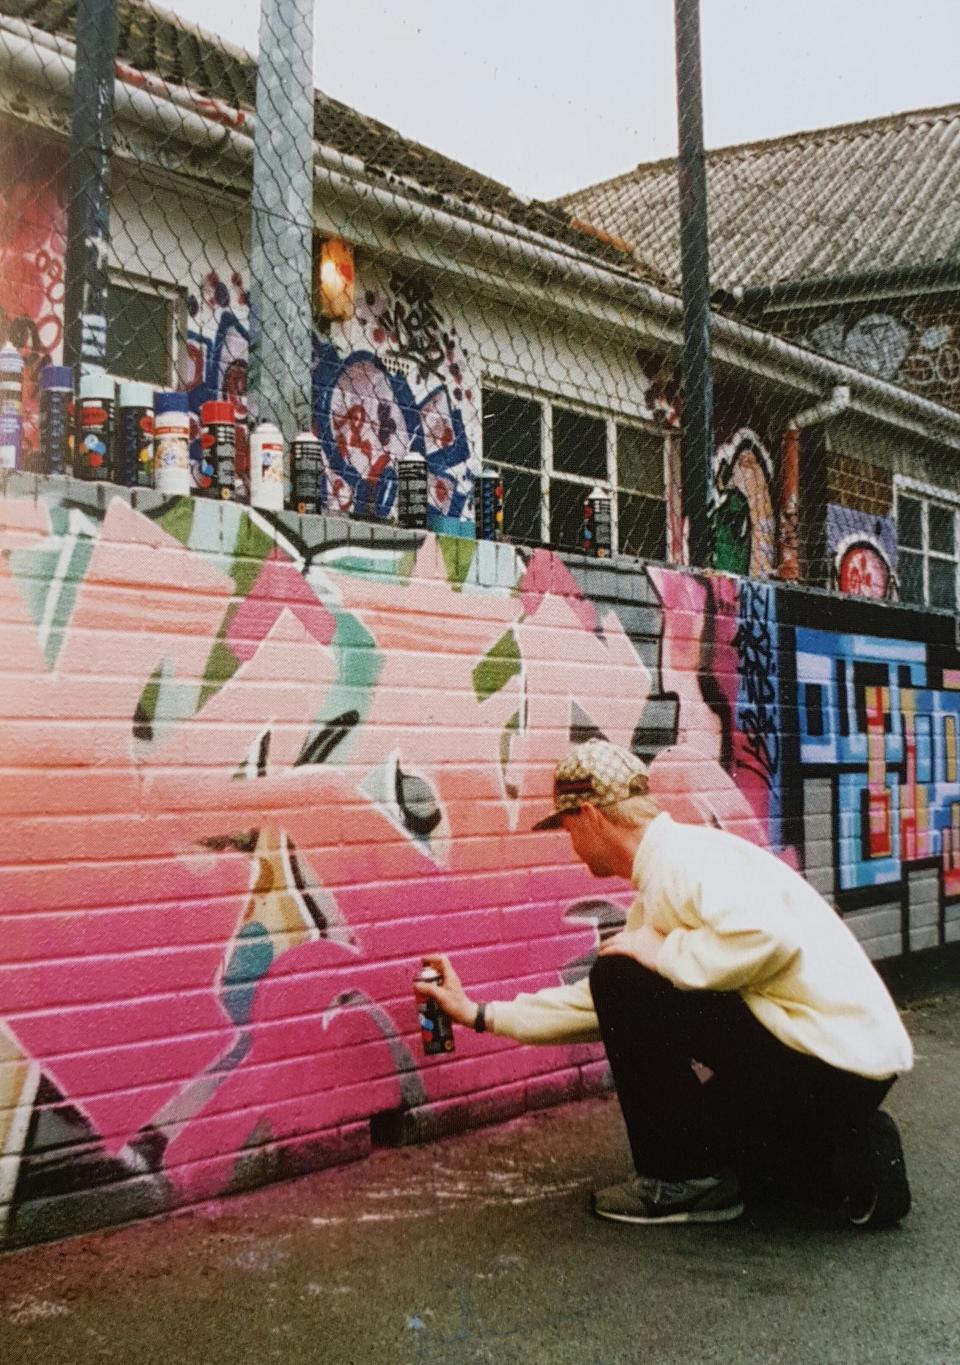 John Nation founded the project as a way to channel young people's creativity in a positive and legal way. Here he is pictured painting at the center in the late 80s. (John Nation)